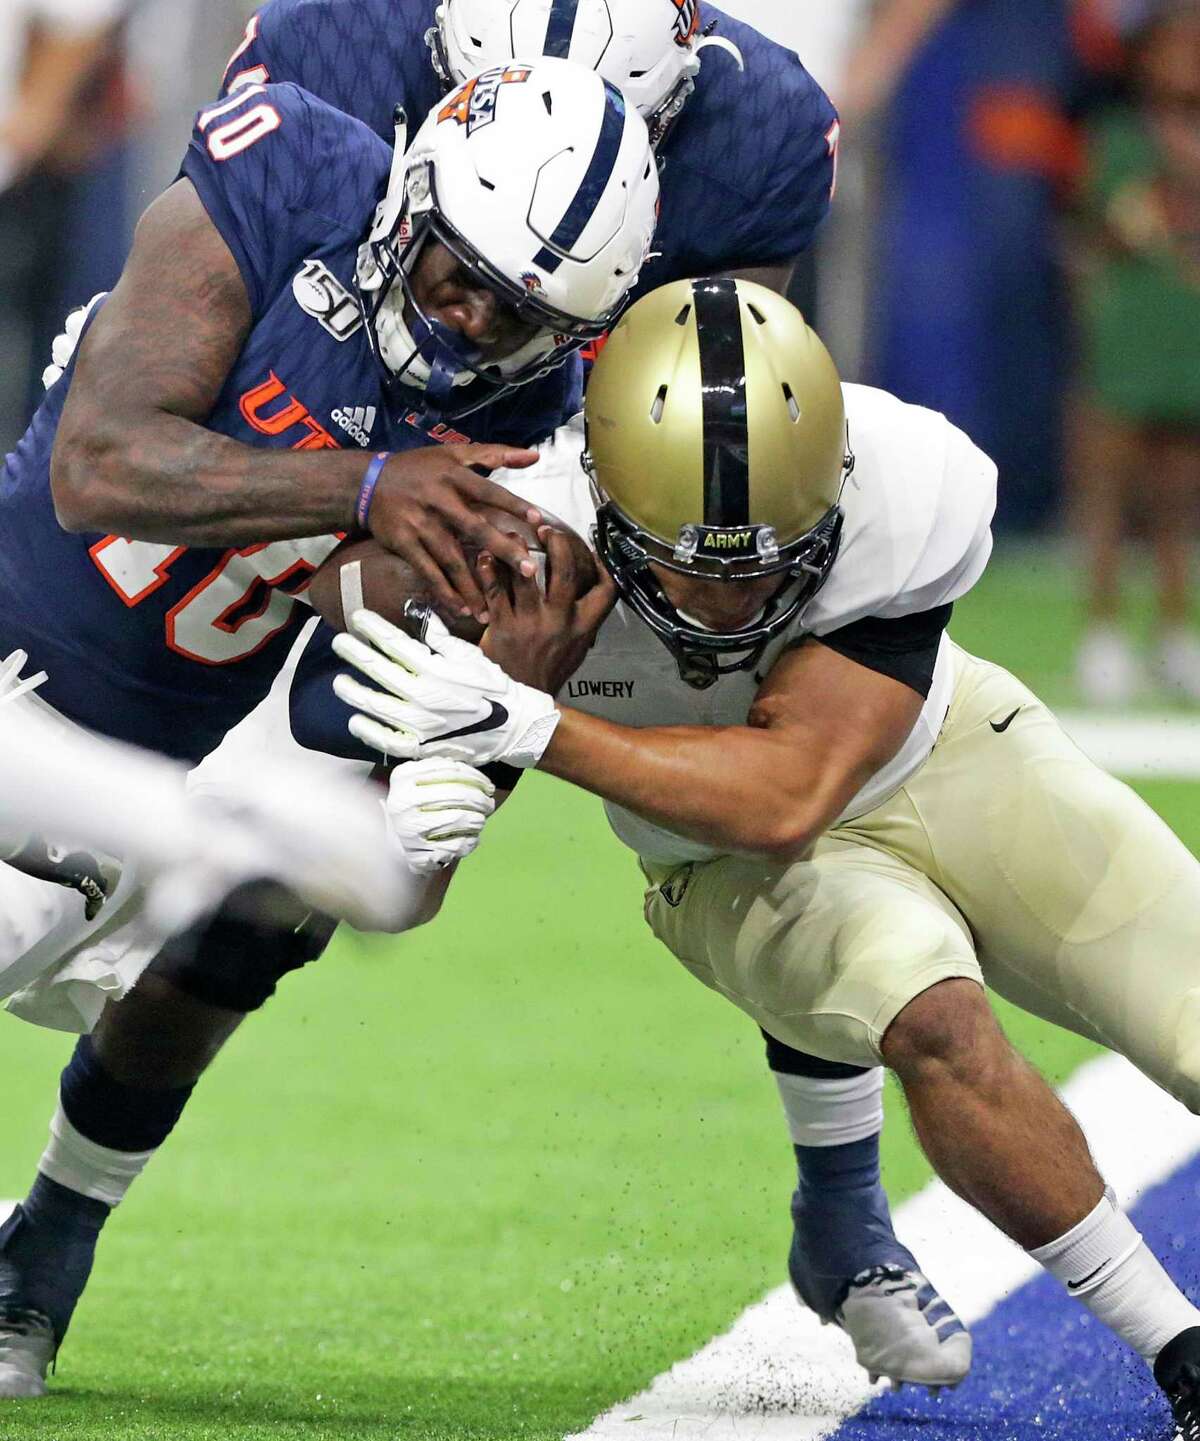 Lowell Narcisse rams the ball in for a touchdown in the second half for the Roadrunners as UTSA hosts Army at the Alamodome on Sept. 14, 2019.